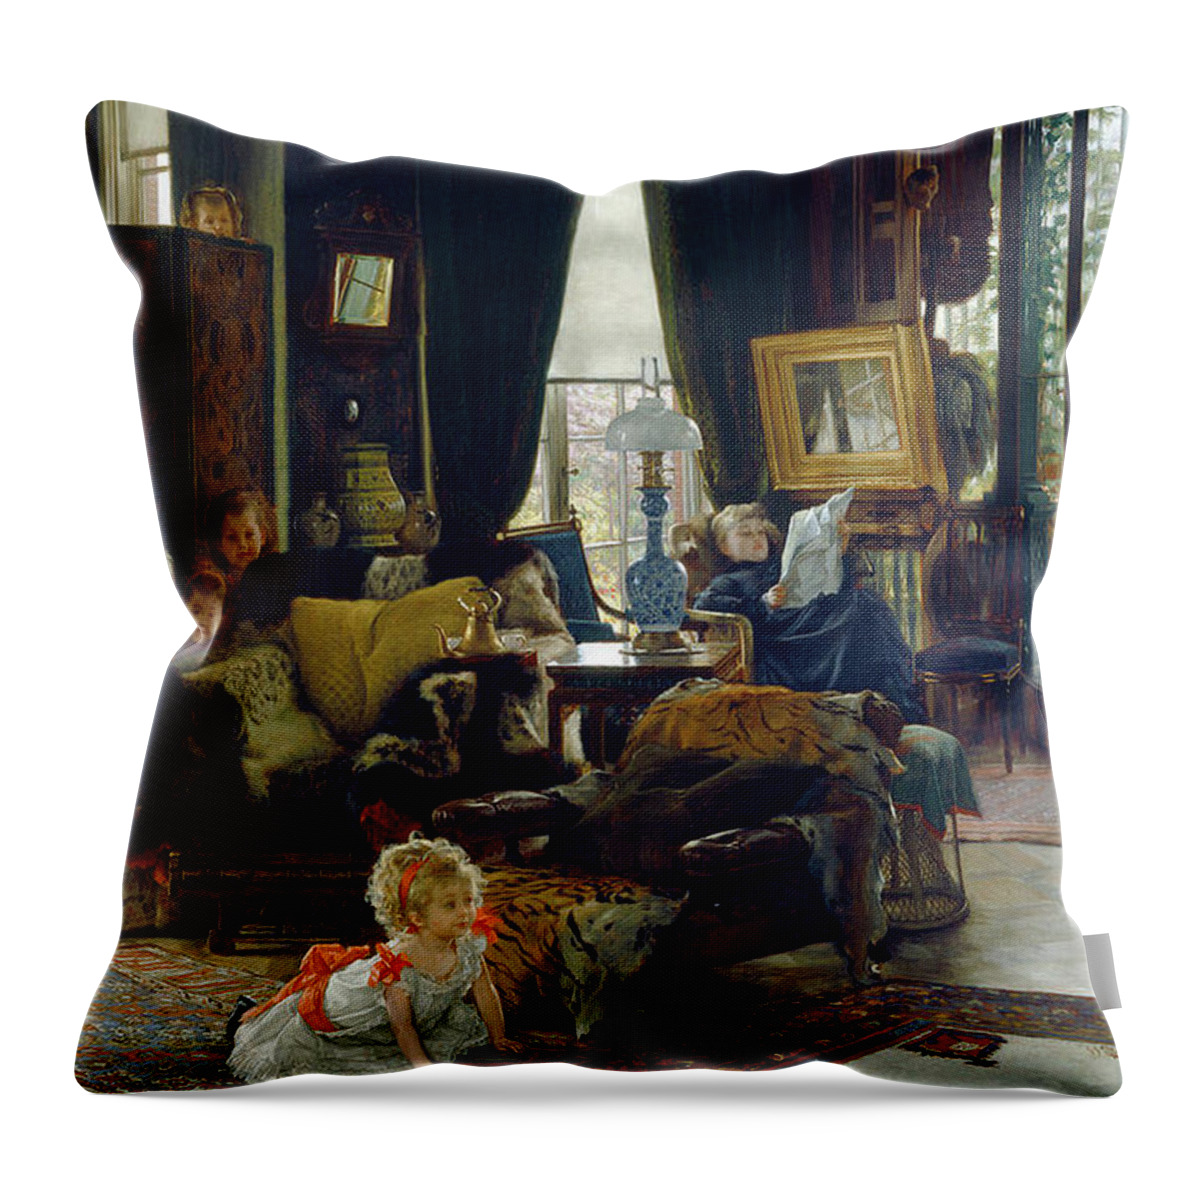 Tissot Throw Pillow featuring the painting Hide And Seek by James Tissot by James Tissot